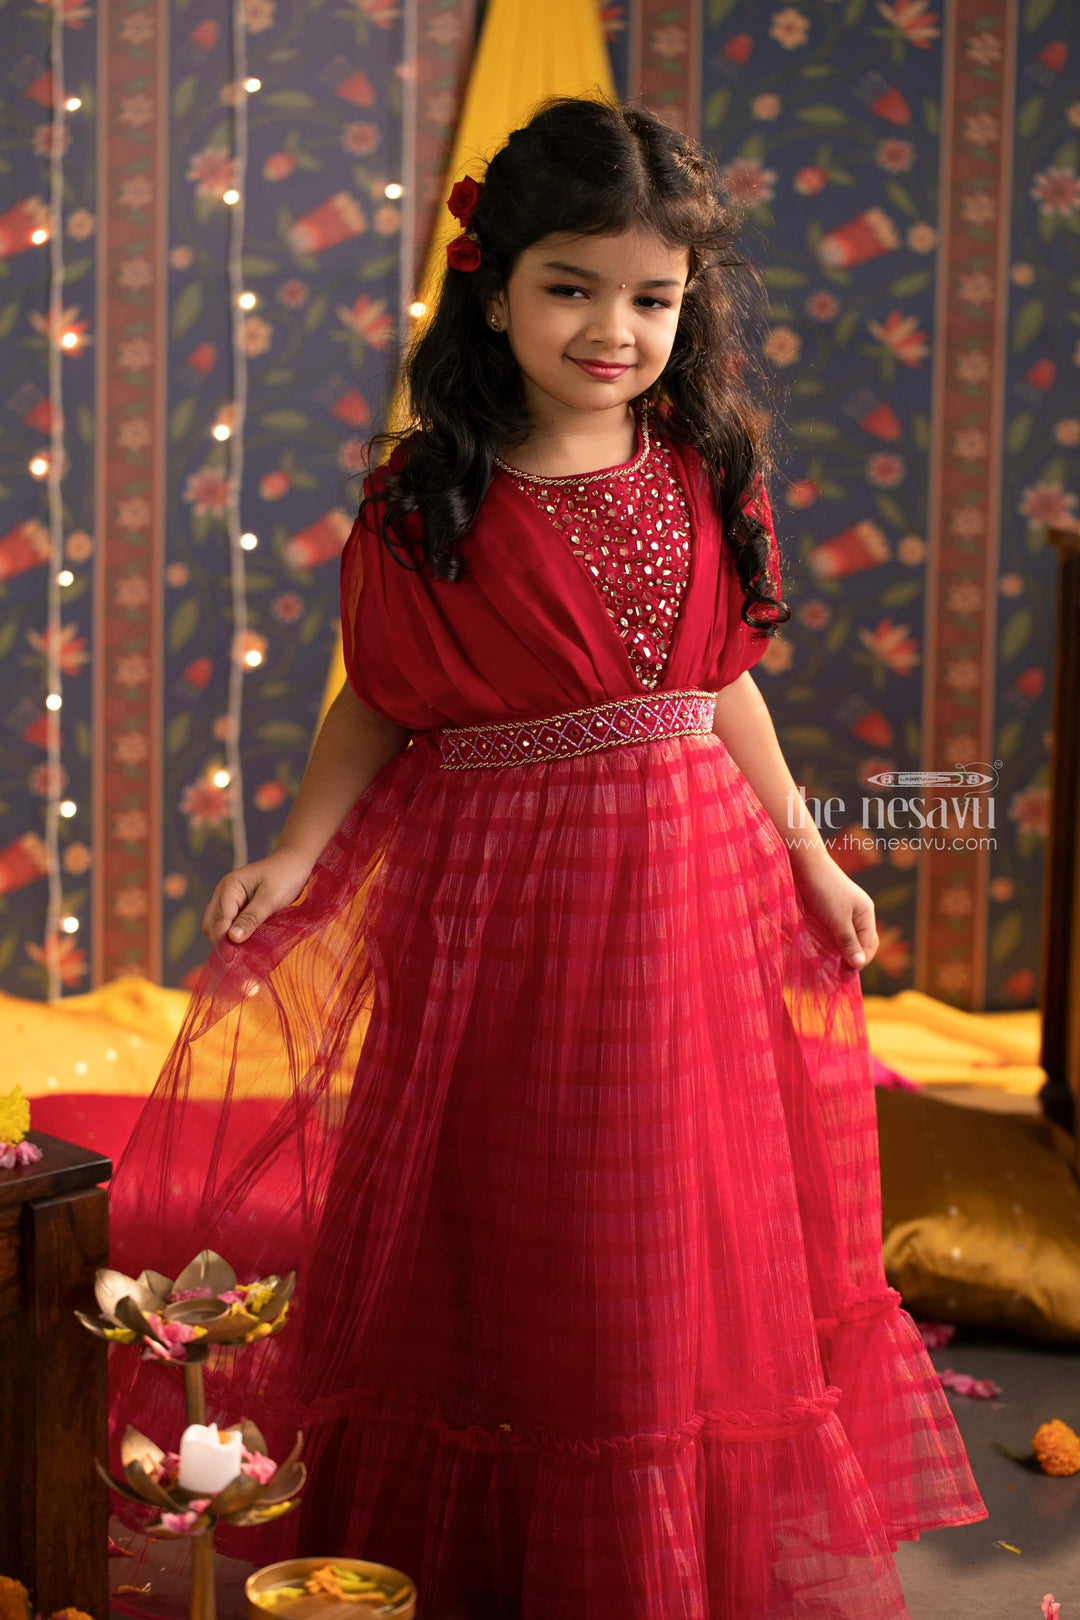 The Nesavu Girls Party Gown Dazzling Mirror Stone Embroidered Pleated & Striped Pattern Red Anarkali Gown for Girls- Elegant Diwali Anarkali Dresses Nesavu 20 (3Y) / Red / Plain Net GA142B-20 Anarkali Embroidery Dress Designs | Festive Diwali Anarkali Outfits | The Nesavu